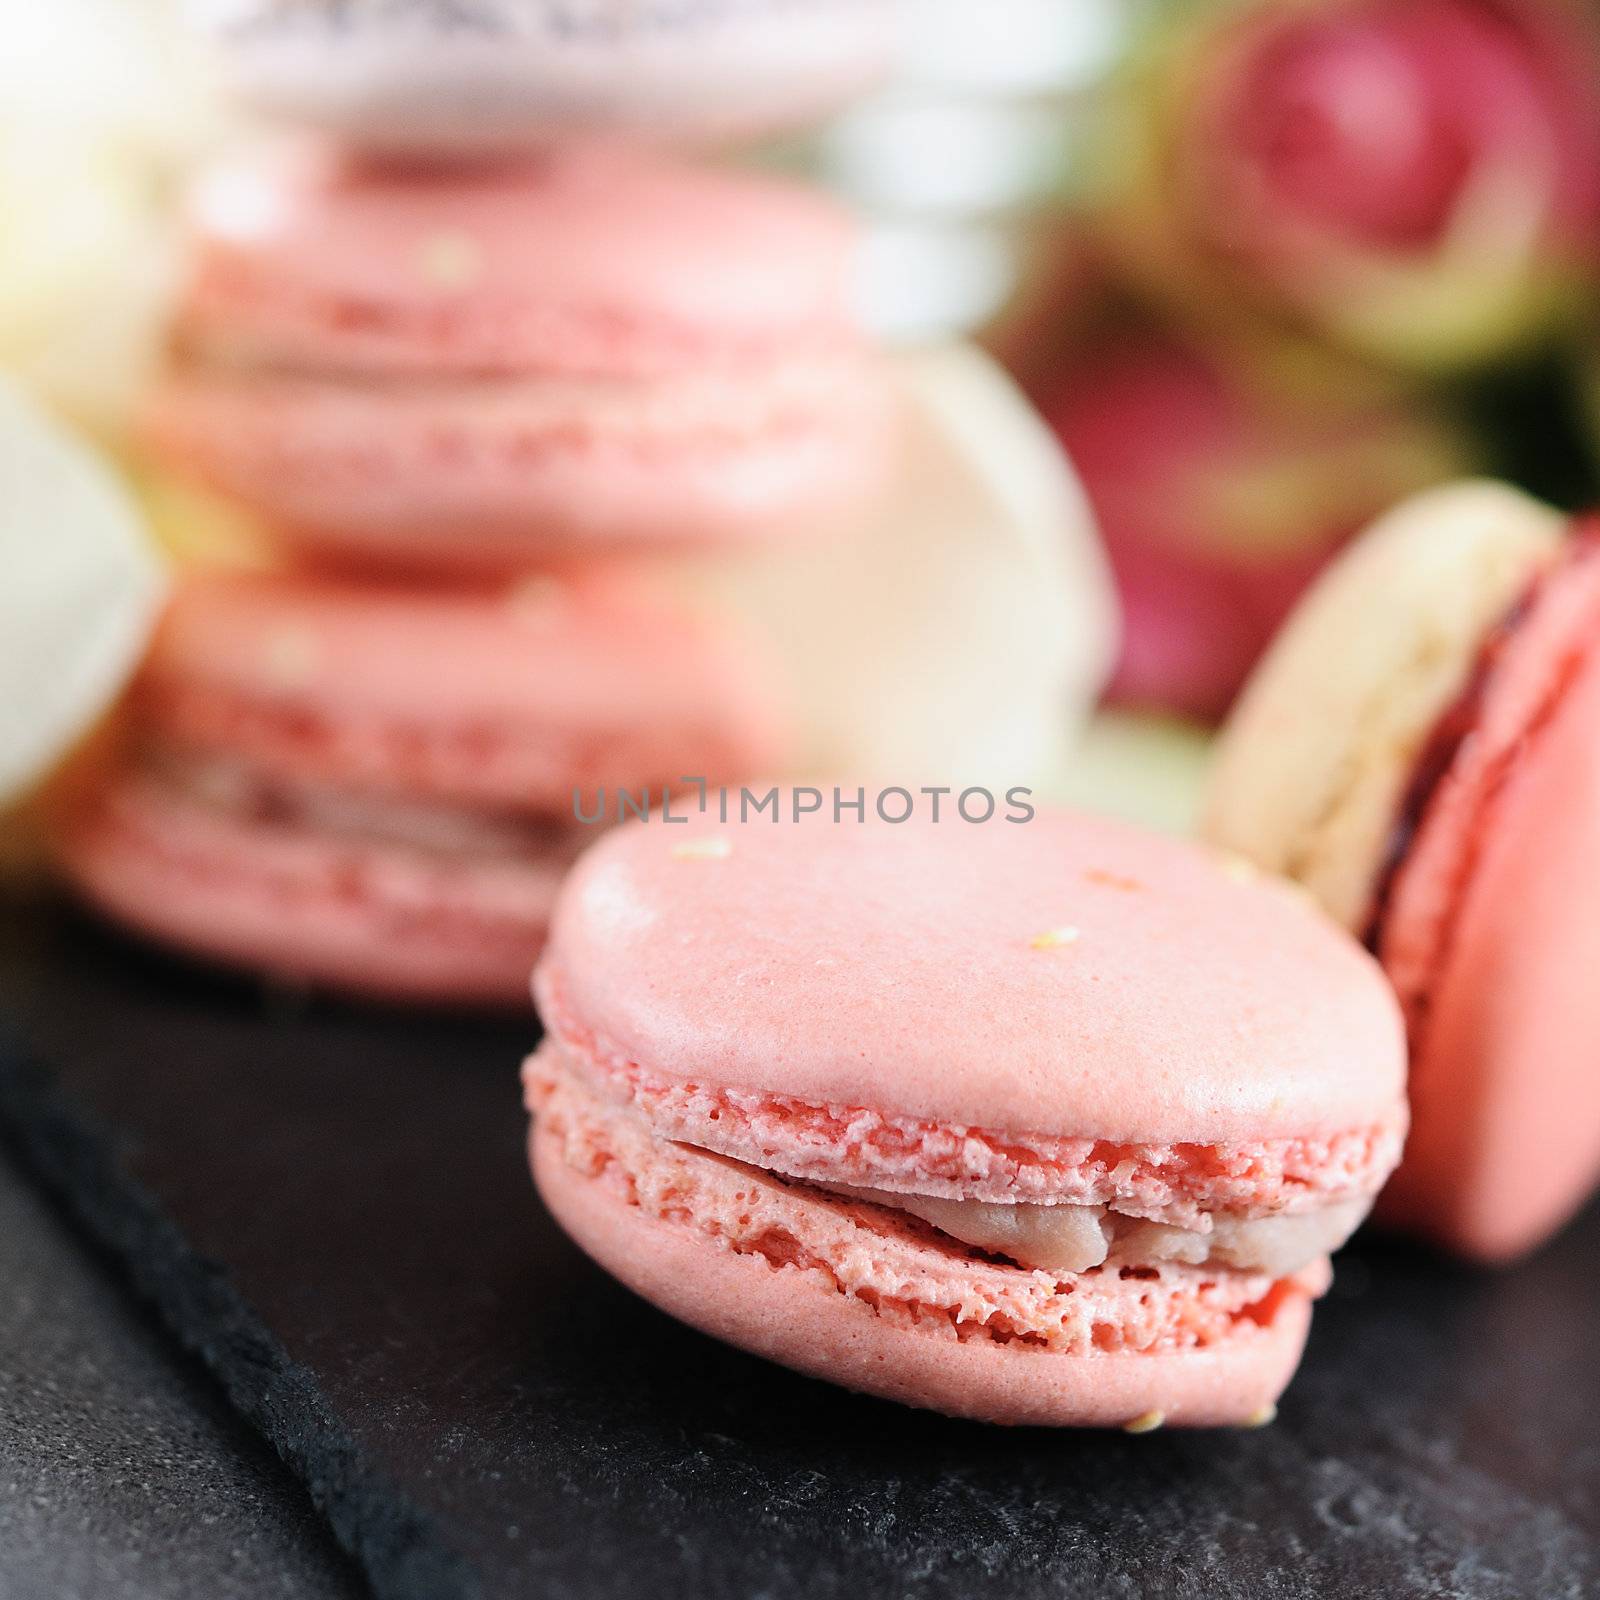 lovely macarons by ventdusud